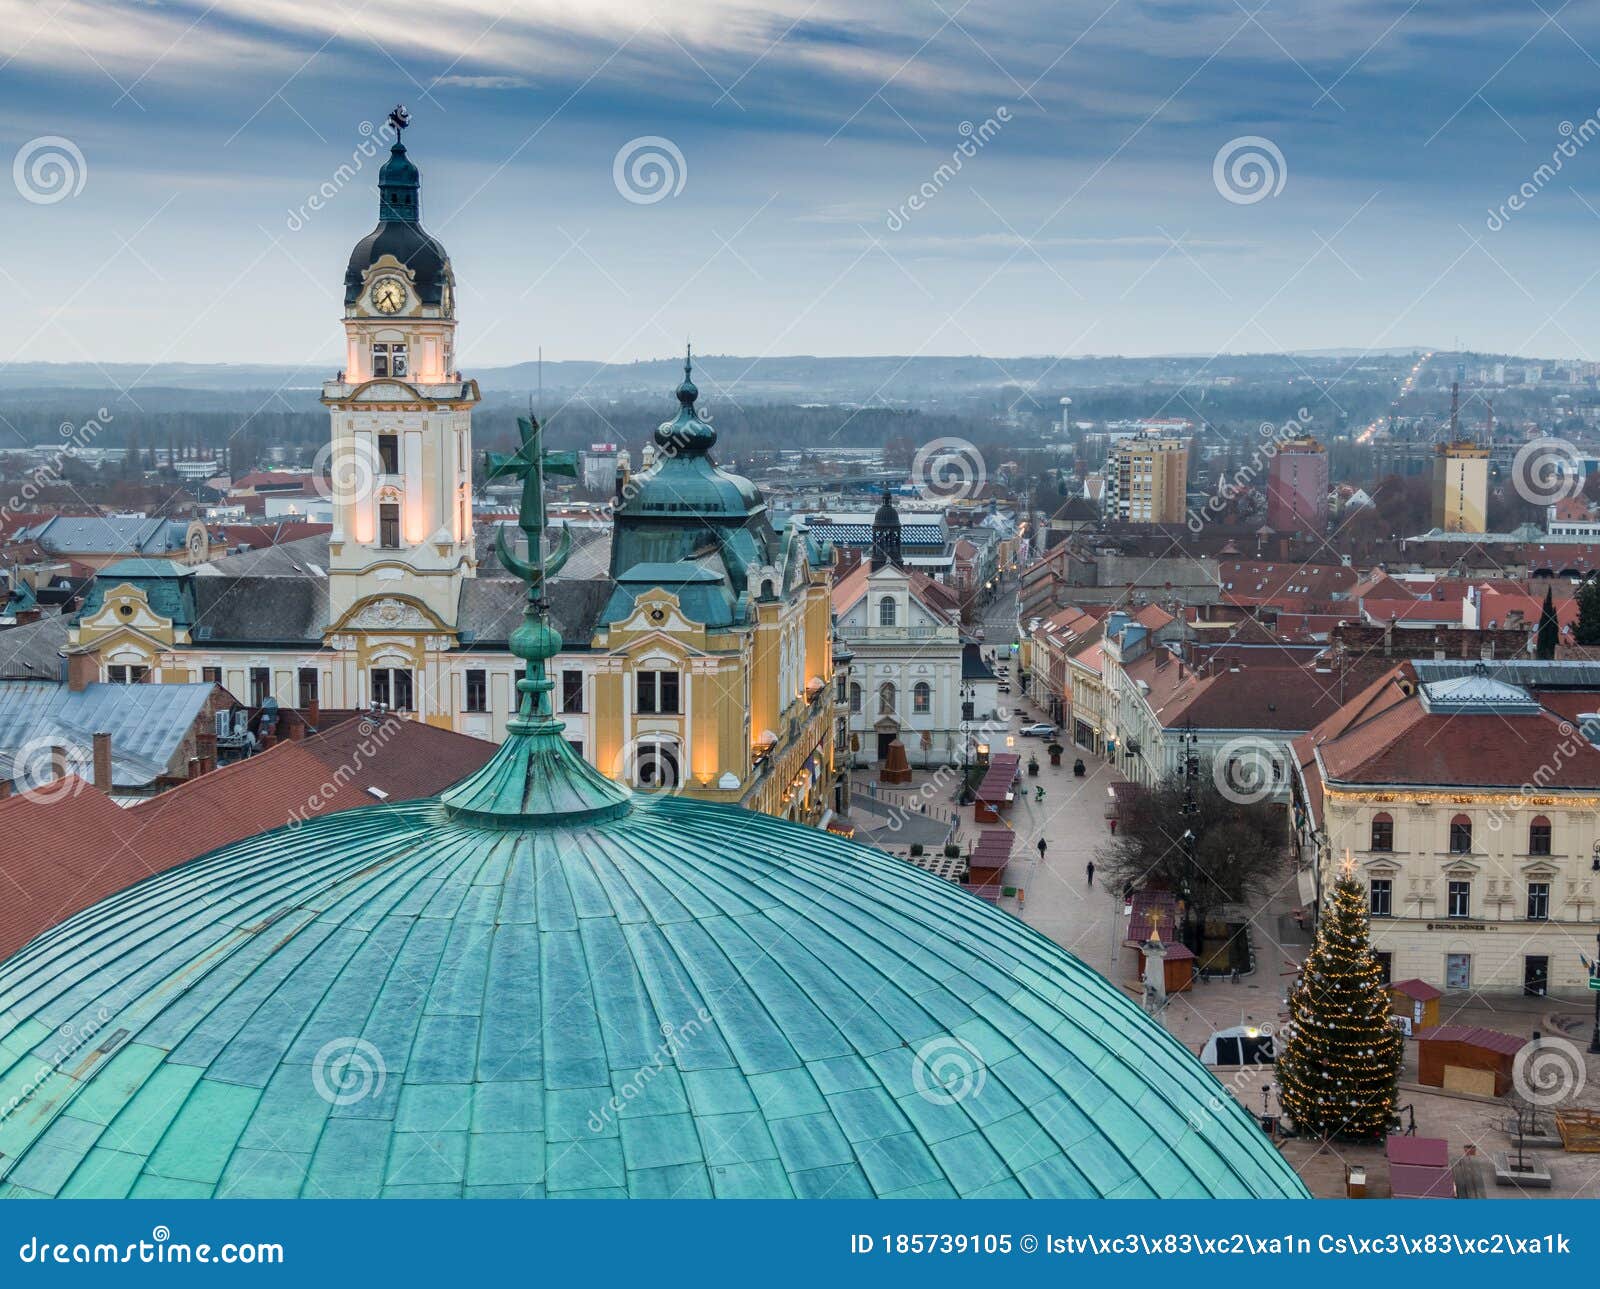 aerial photo of advent in pecs, hungary